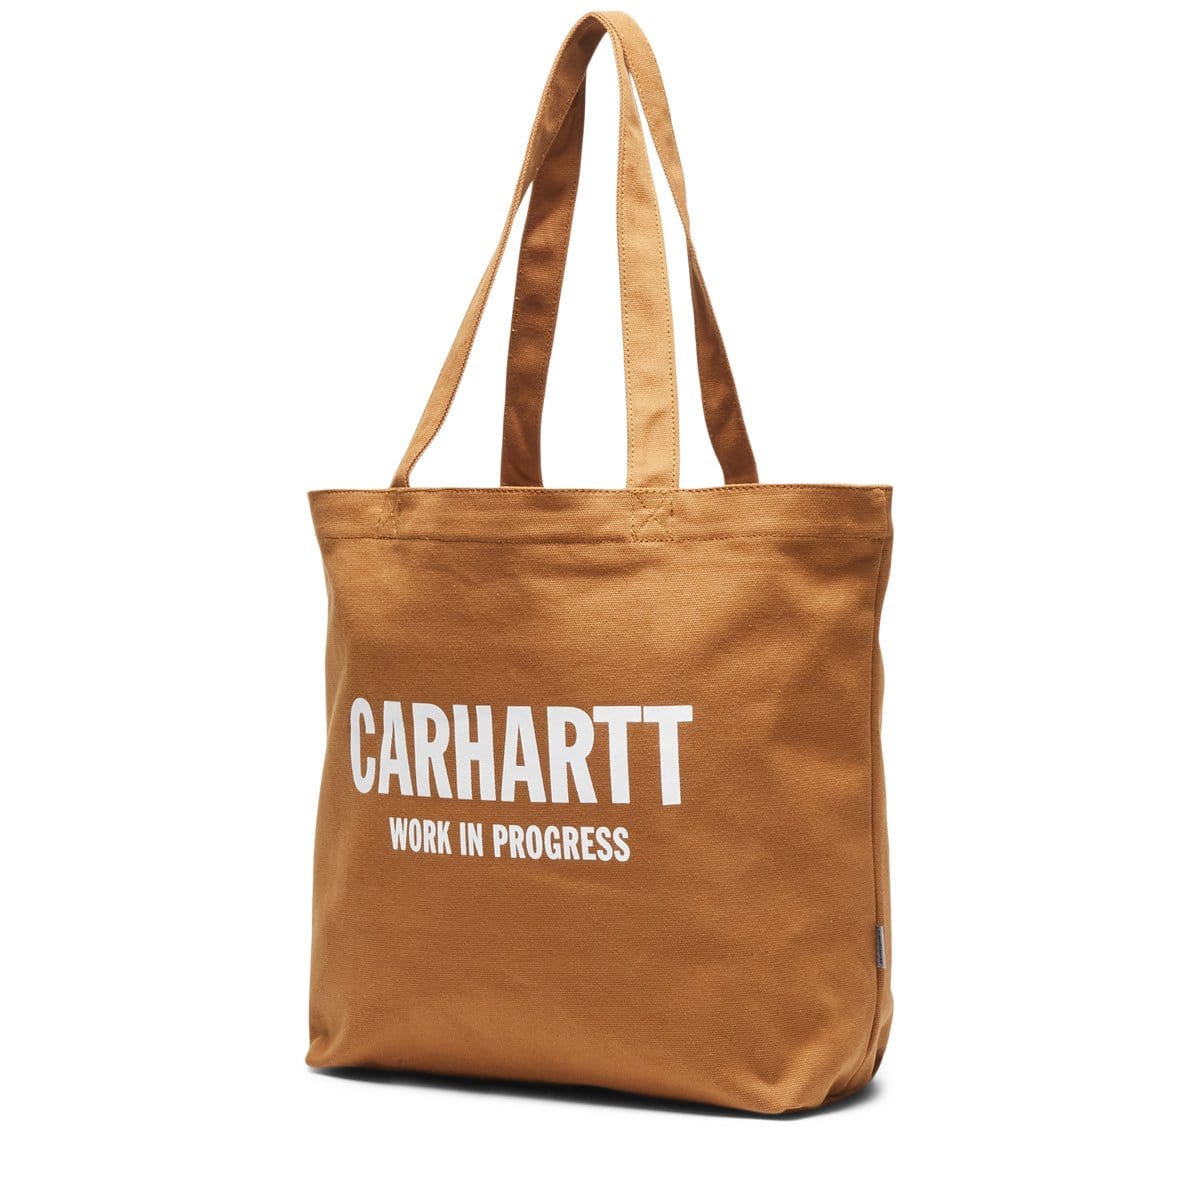 Carhartt W.I.P. Bags & Accessories RUM/WAX / OS WAVY STATE TOTE